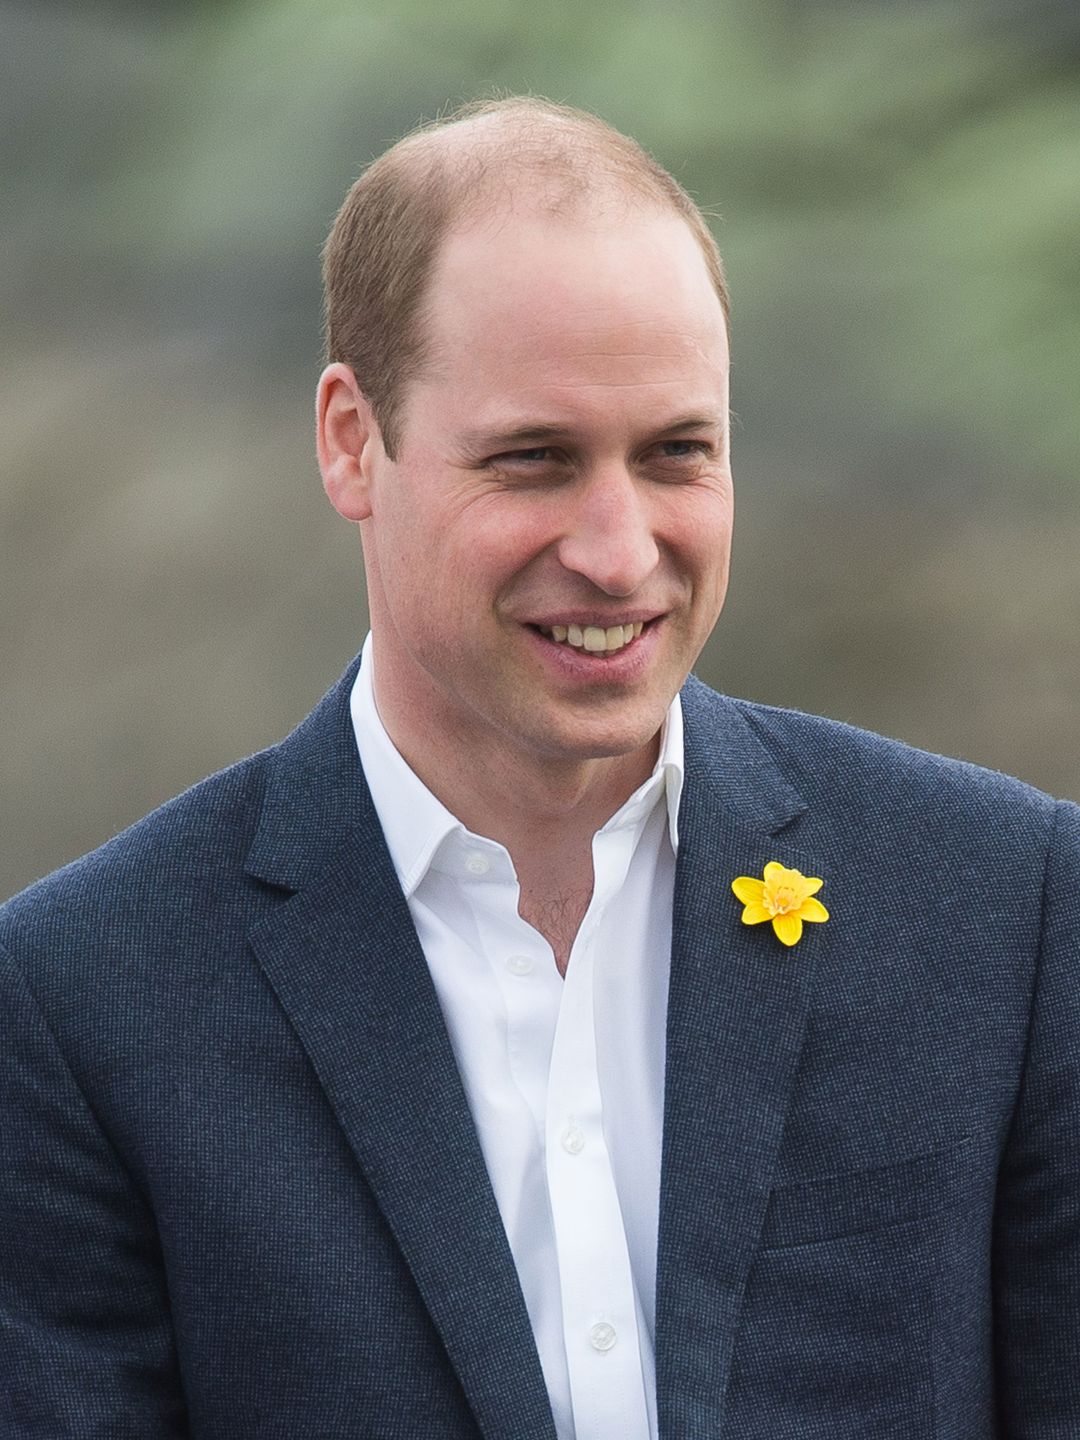 Prince William does he have a wife